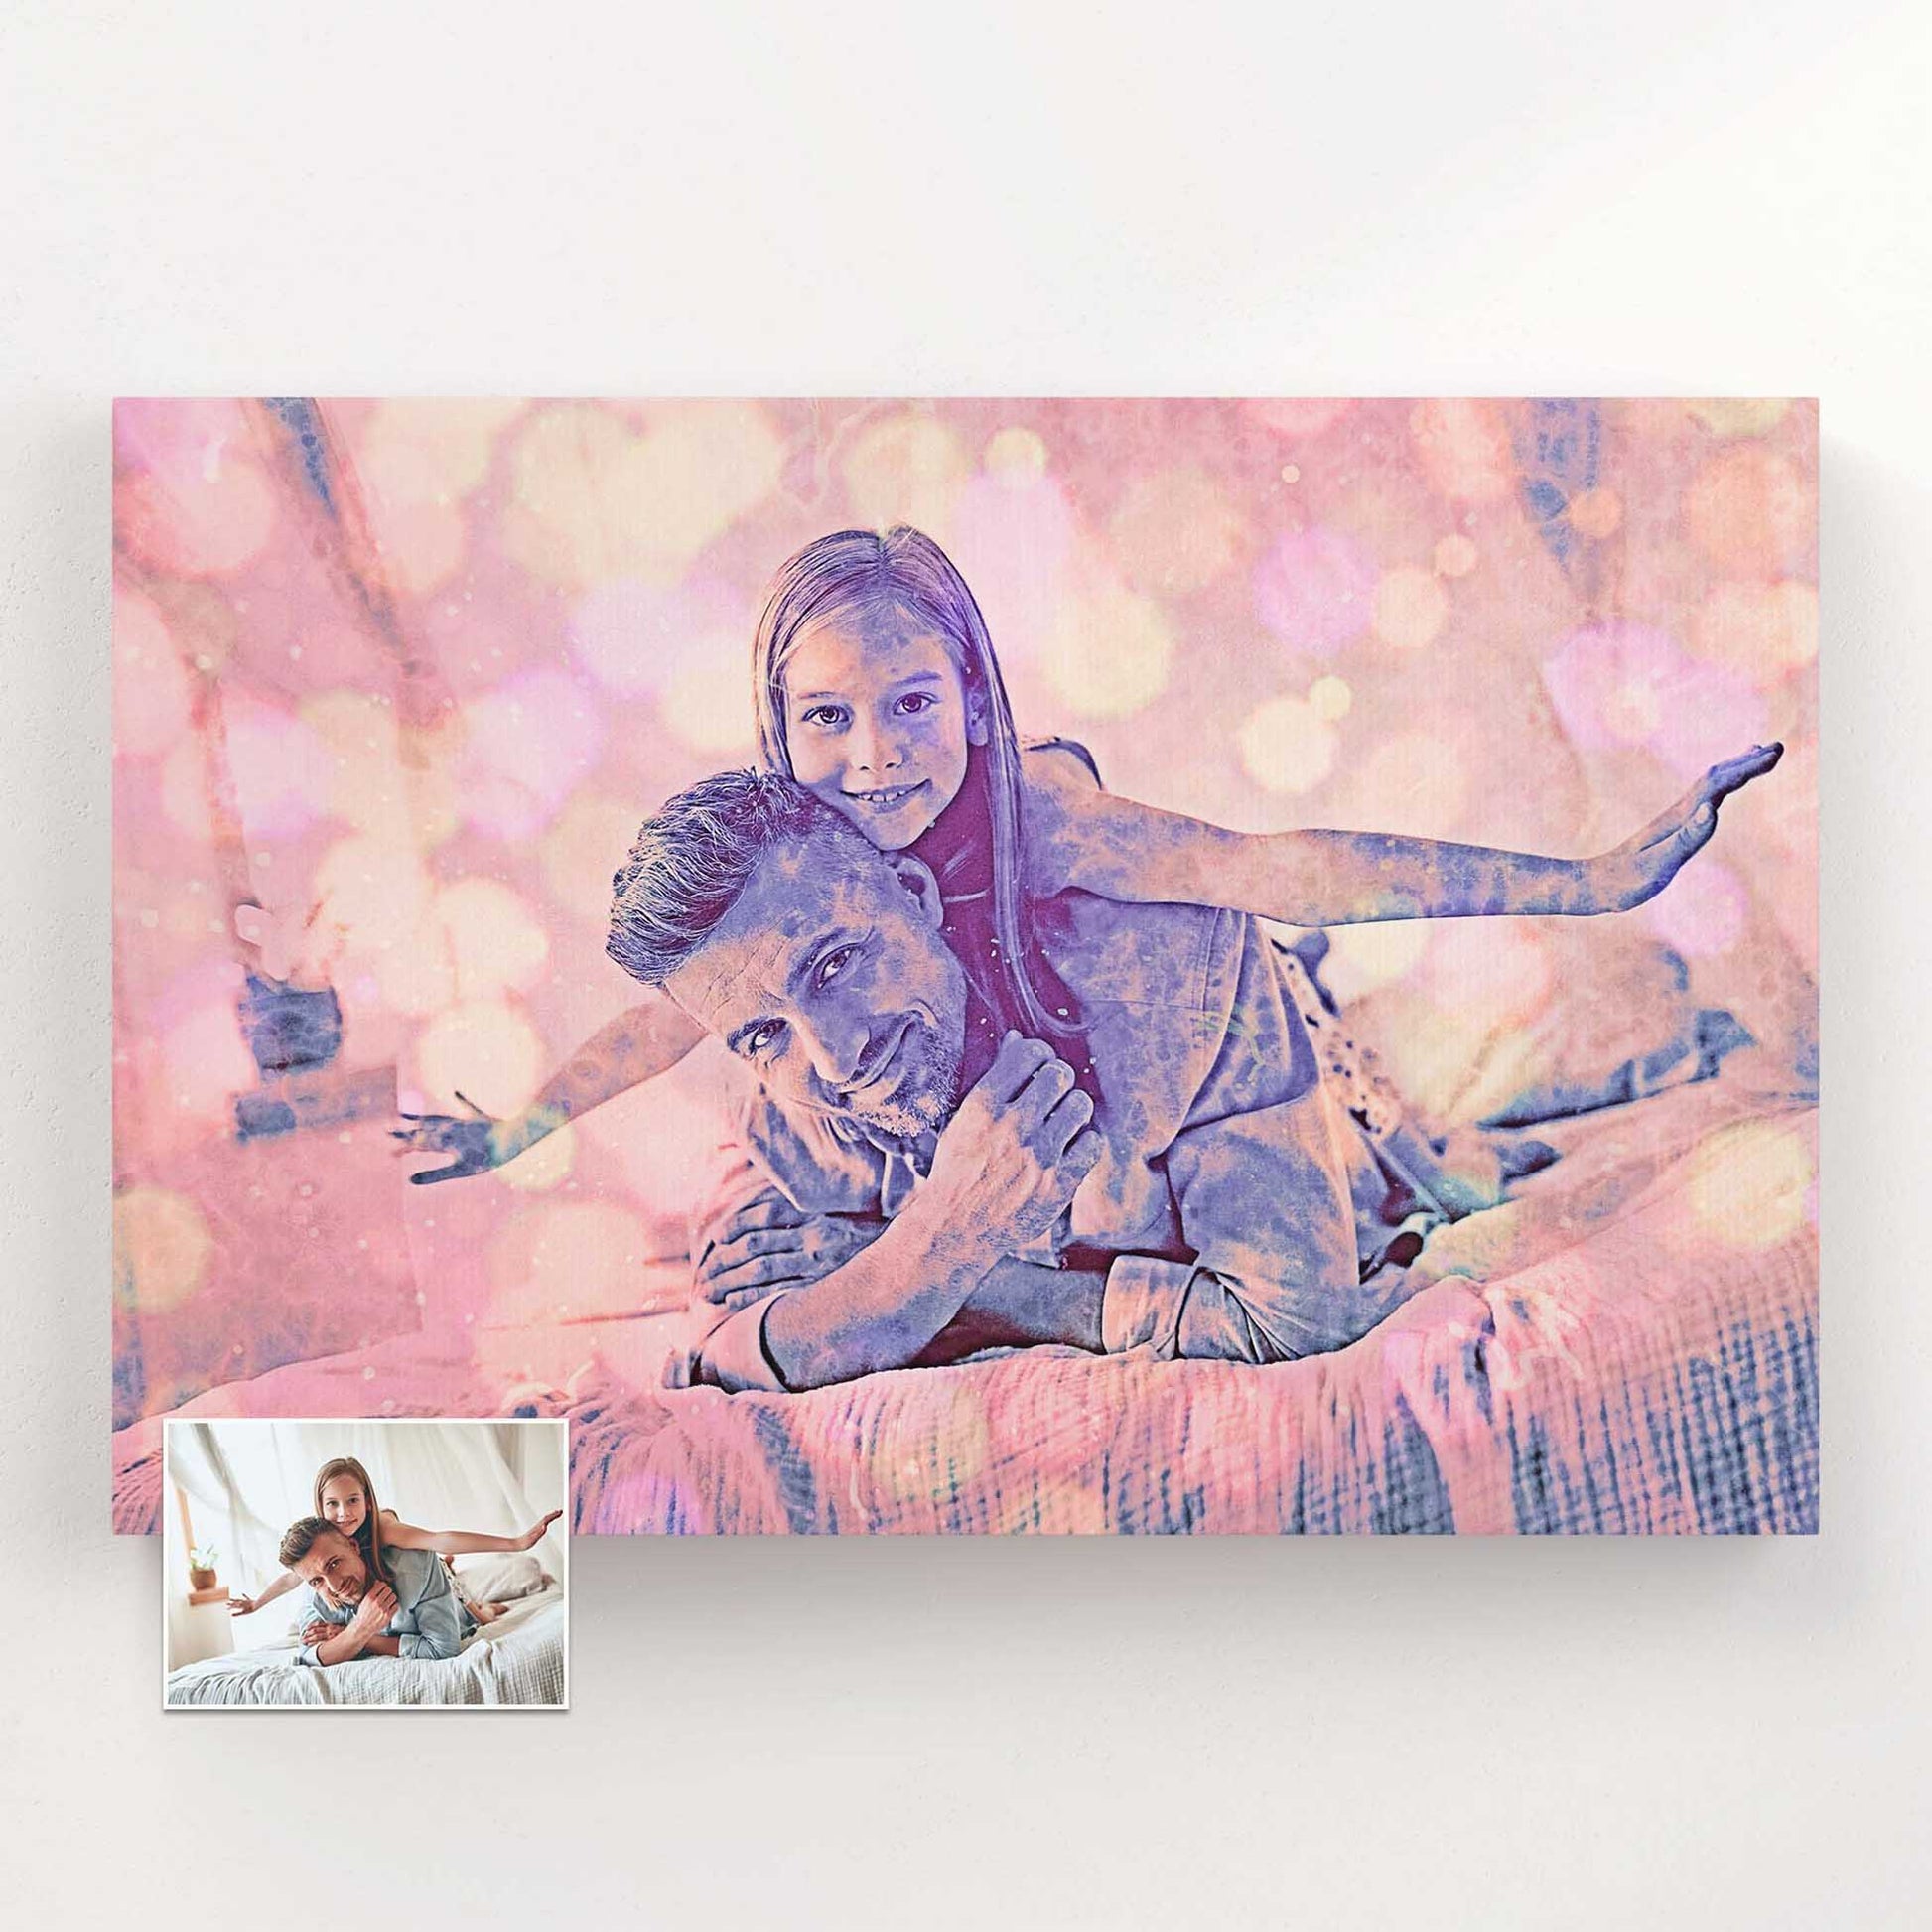 Experience the beauty of handmade canvas art with our Special Purple FX Canvas. Each piece is meticulously crafted to capture the essence of your photo and transform it into a stunning digital art masterpiece